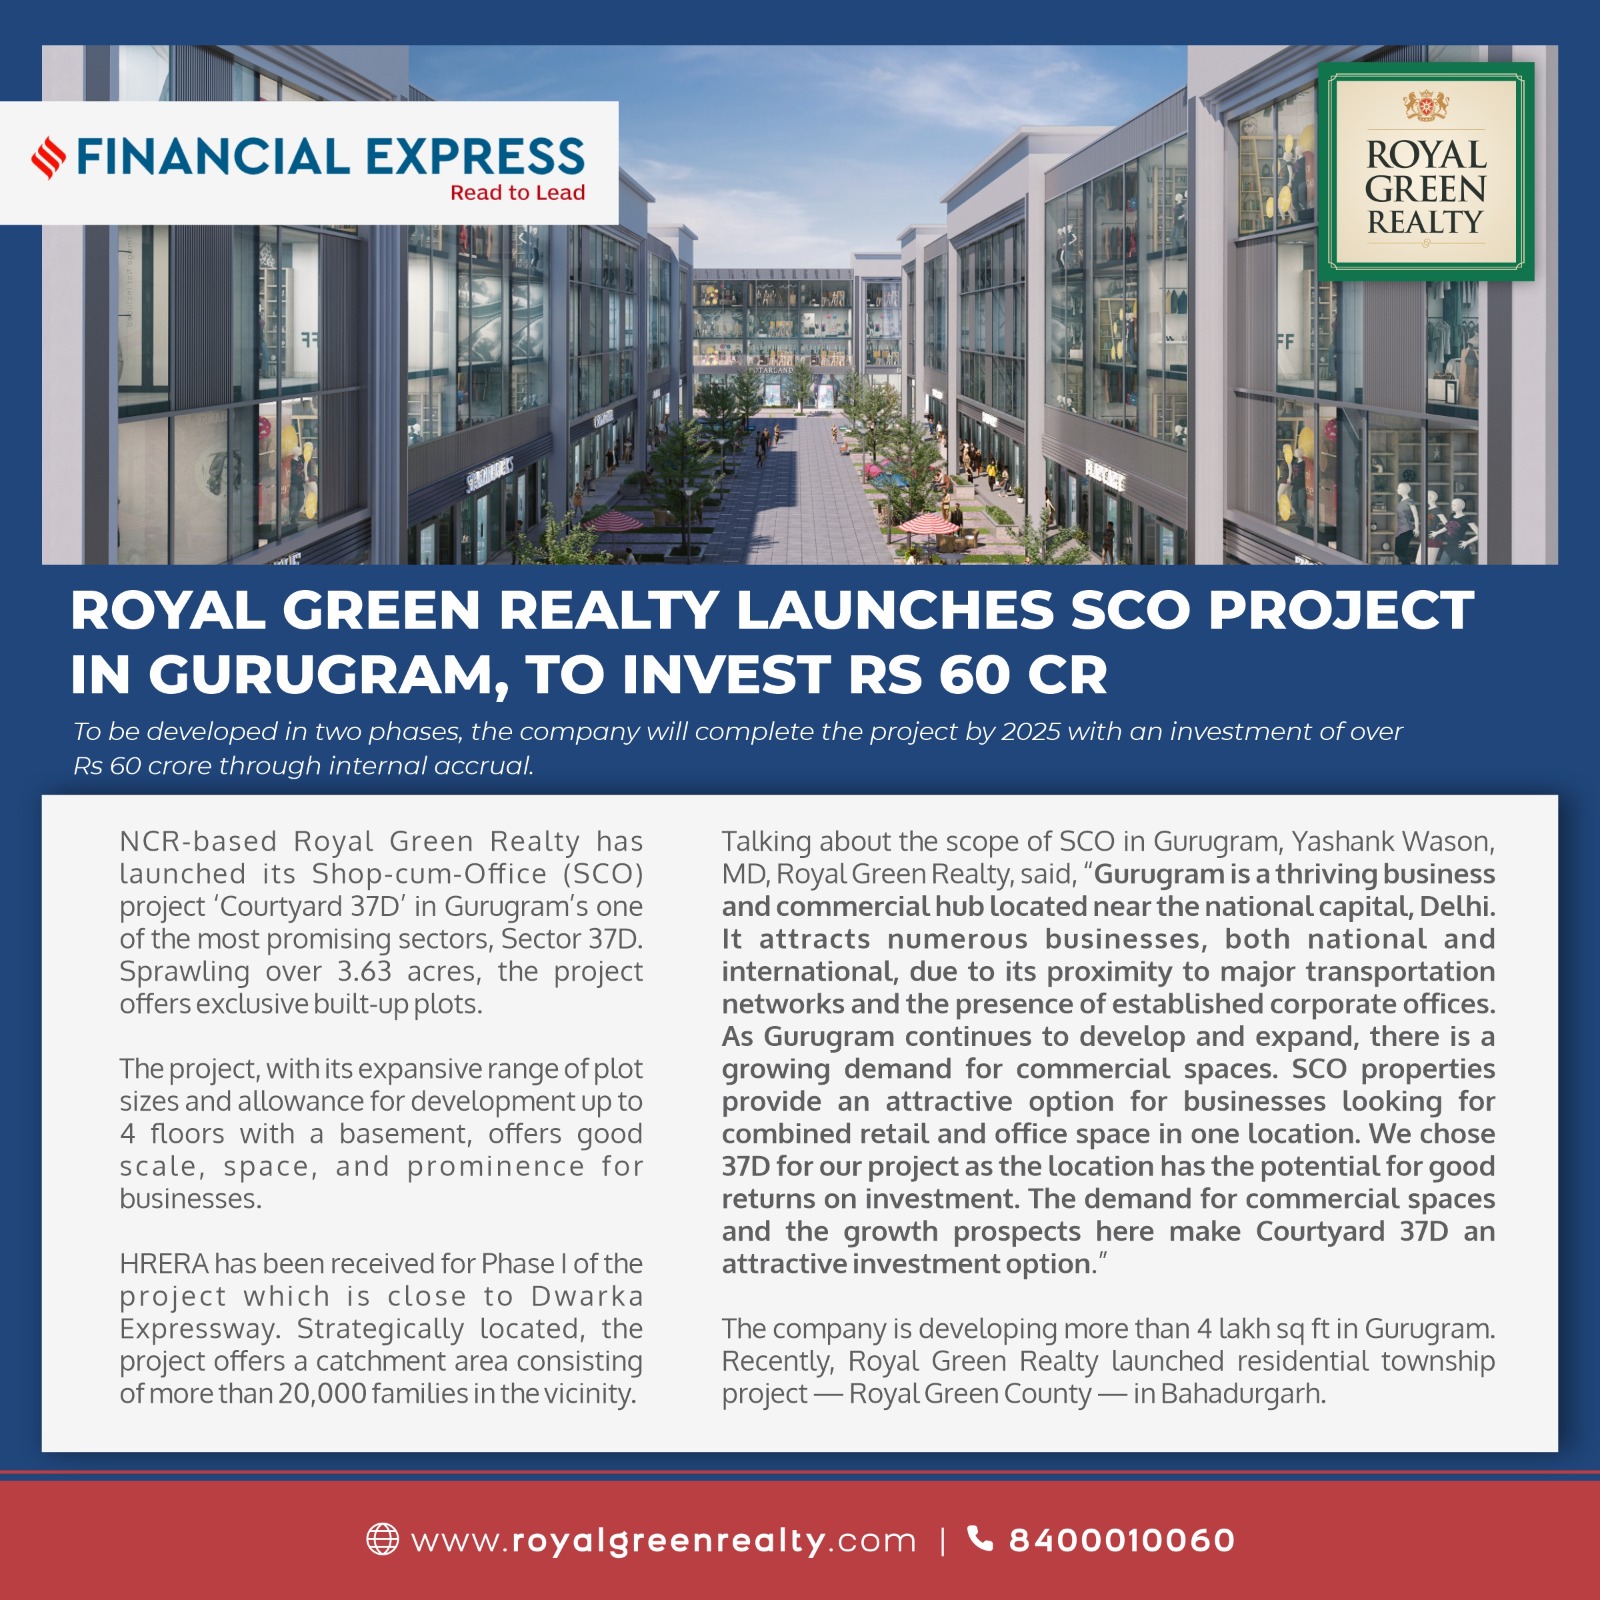 Royal Green Realty launches SCO project in Gurugram, to invest Rs 60 cr